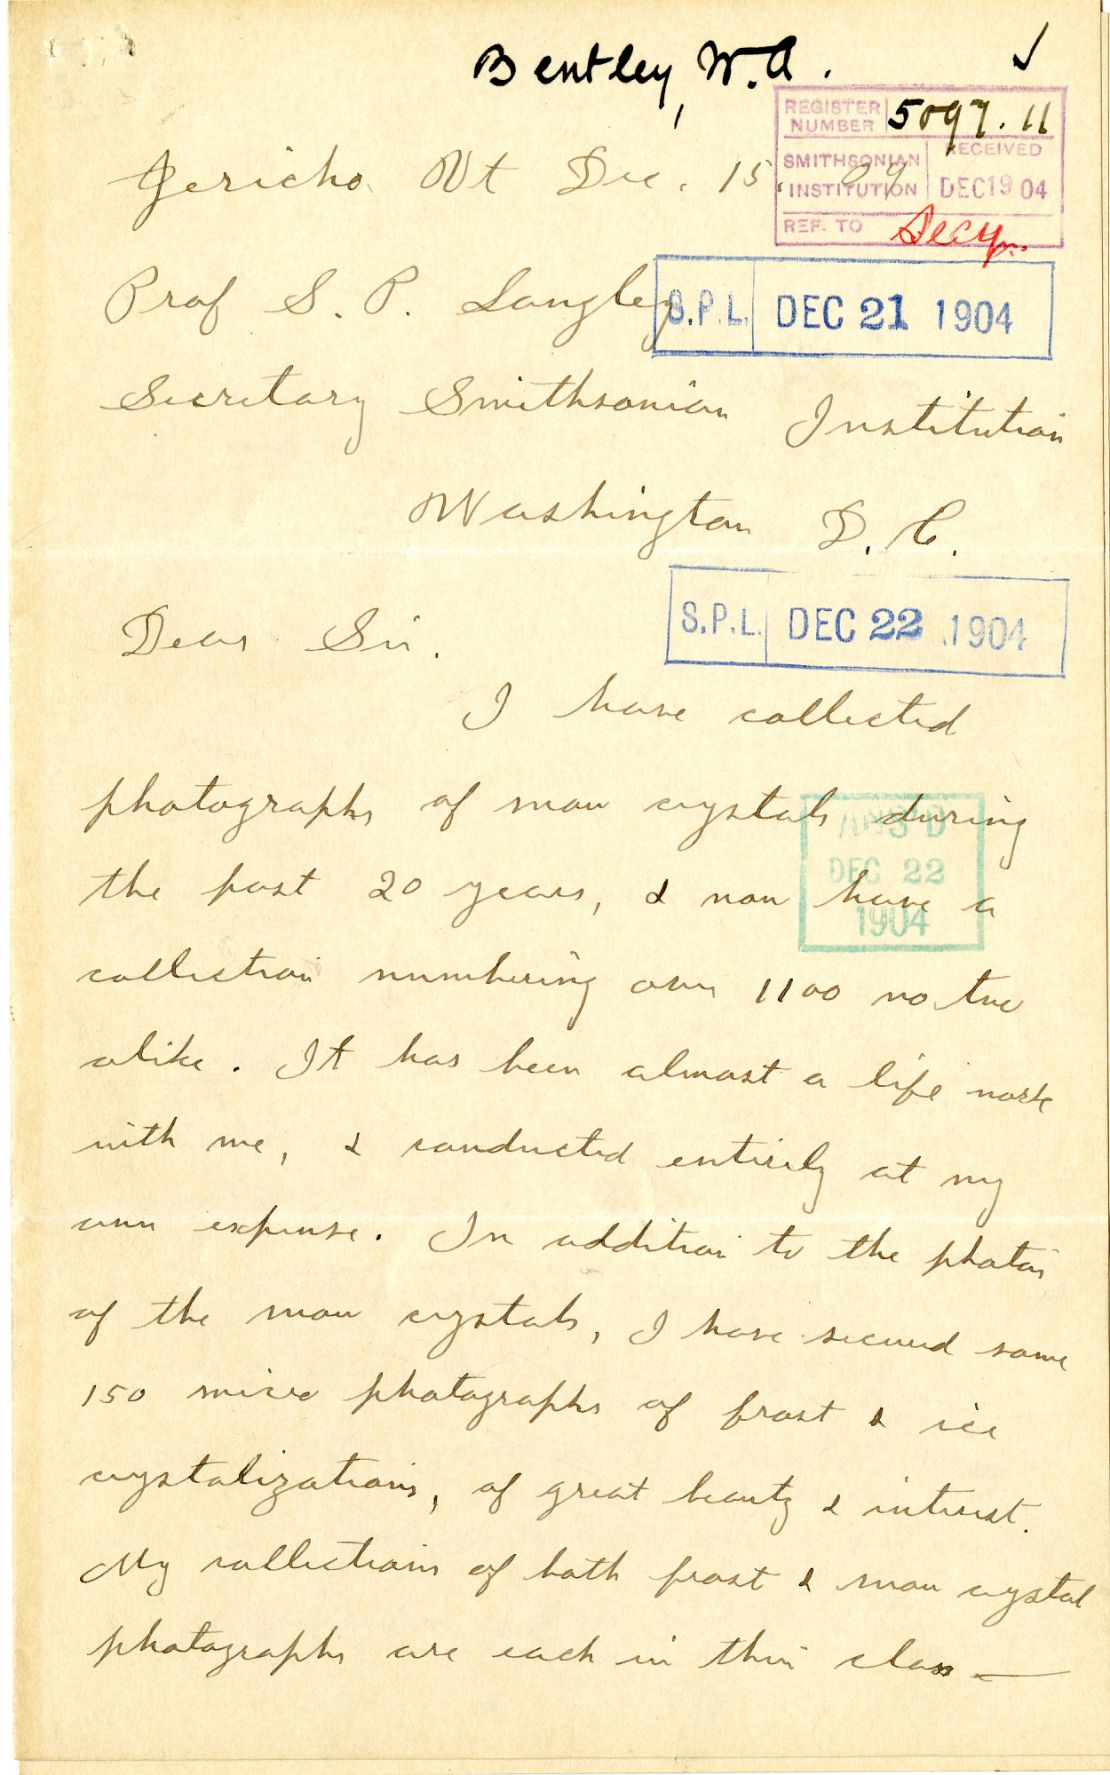 Wilson Bentley sent a letter to the secretary of the Smithsonian Institution, Samuel Langley, on December 15, 1904.